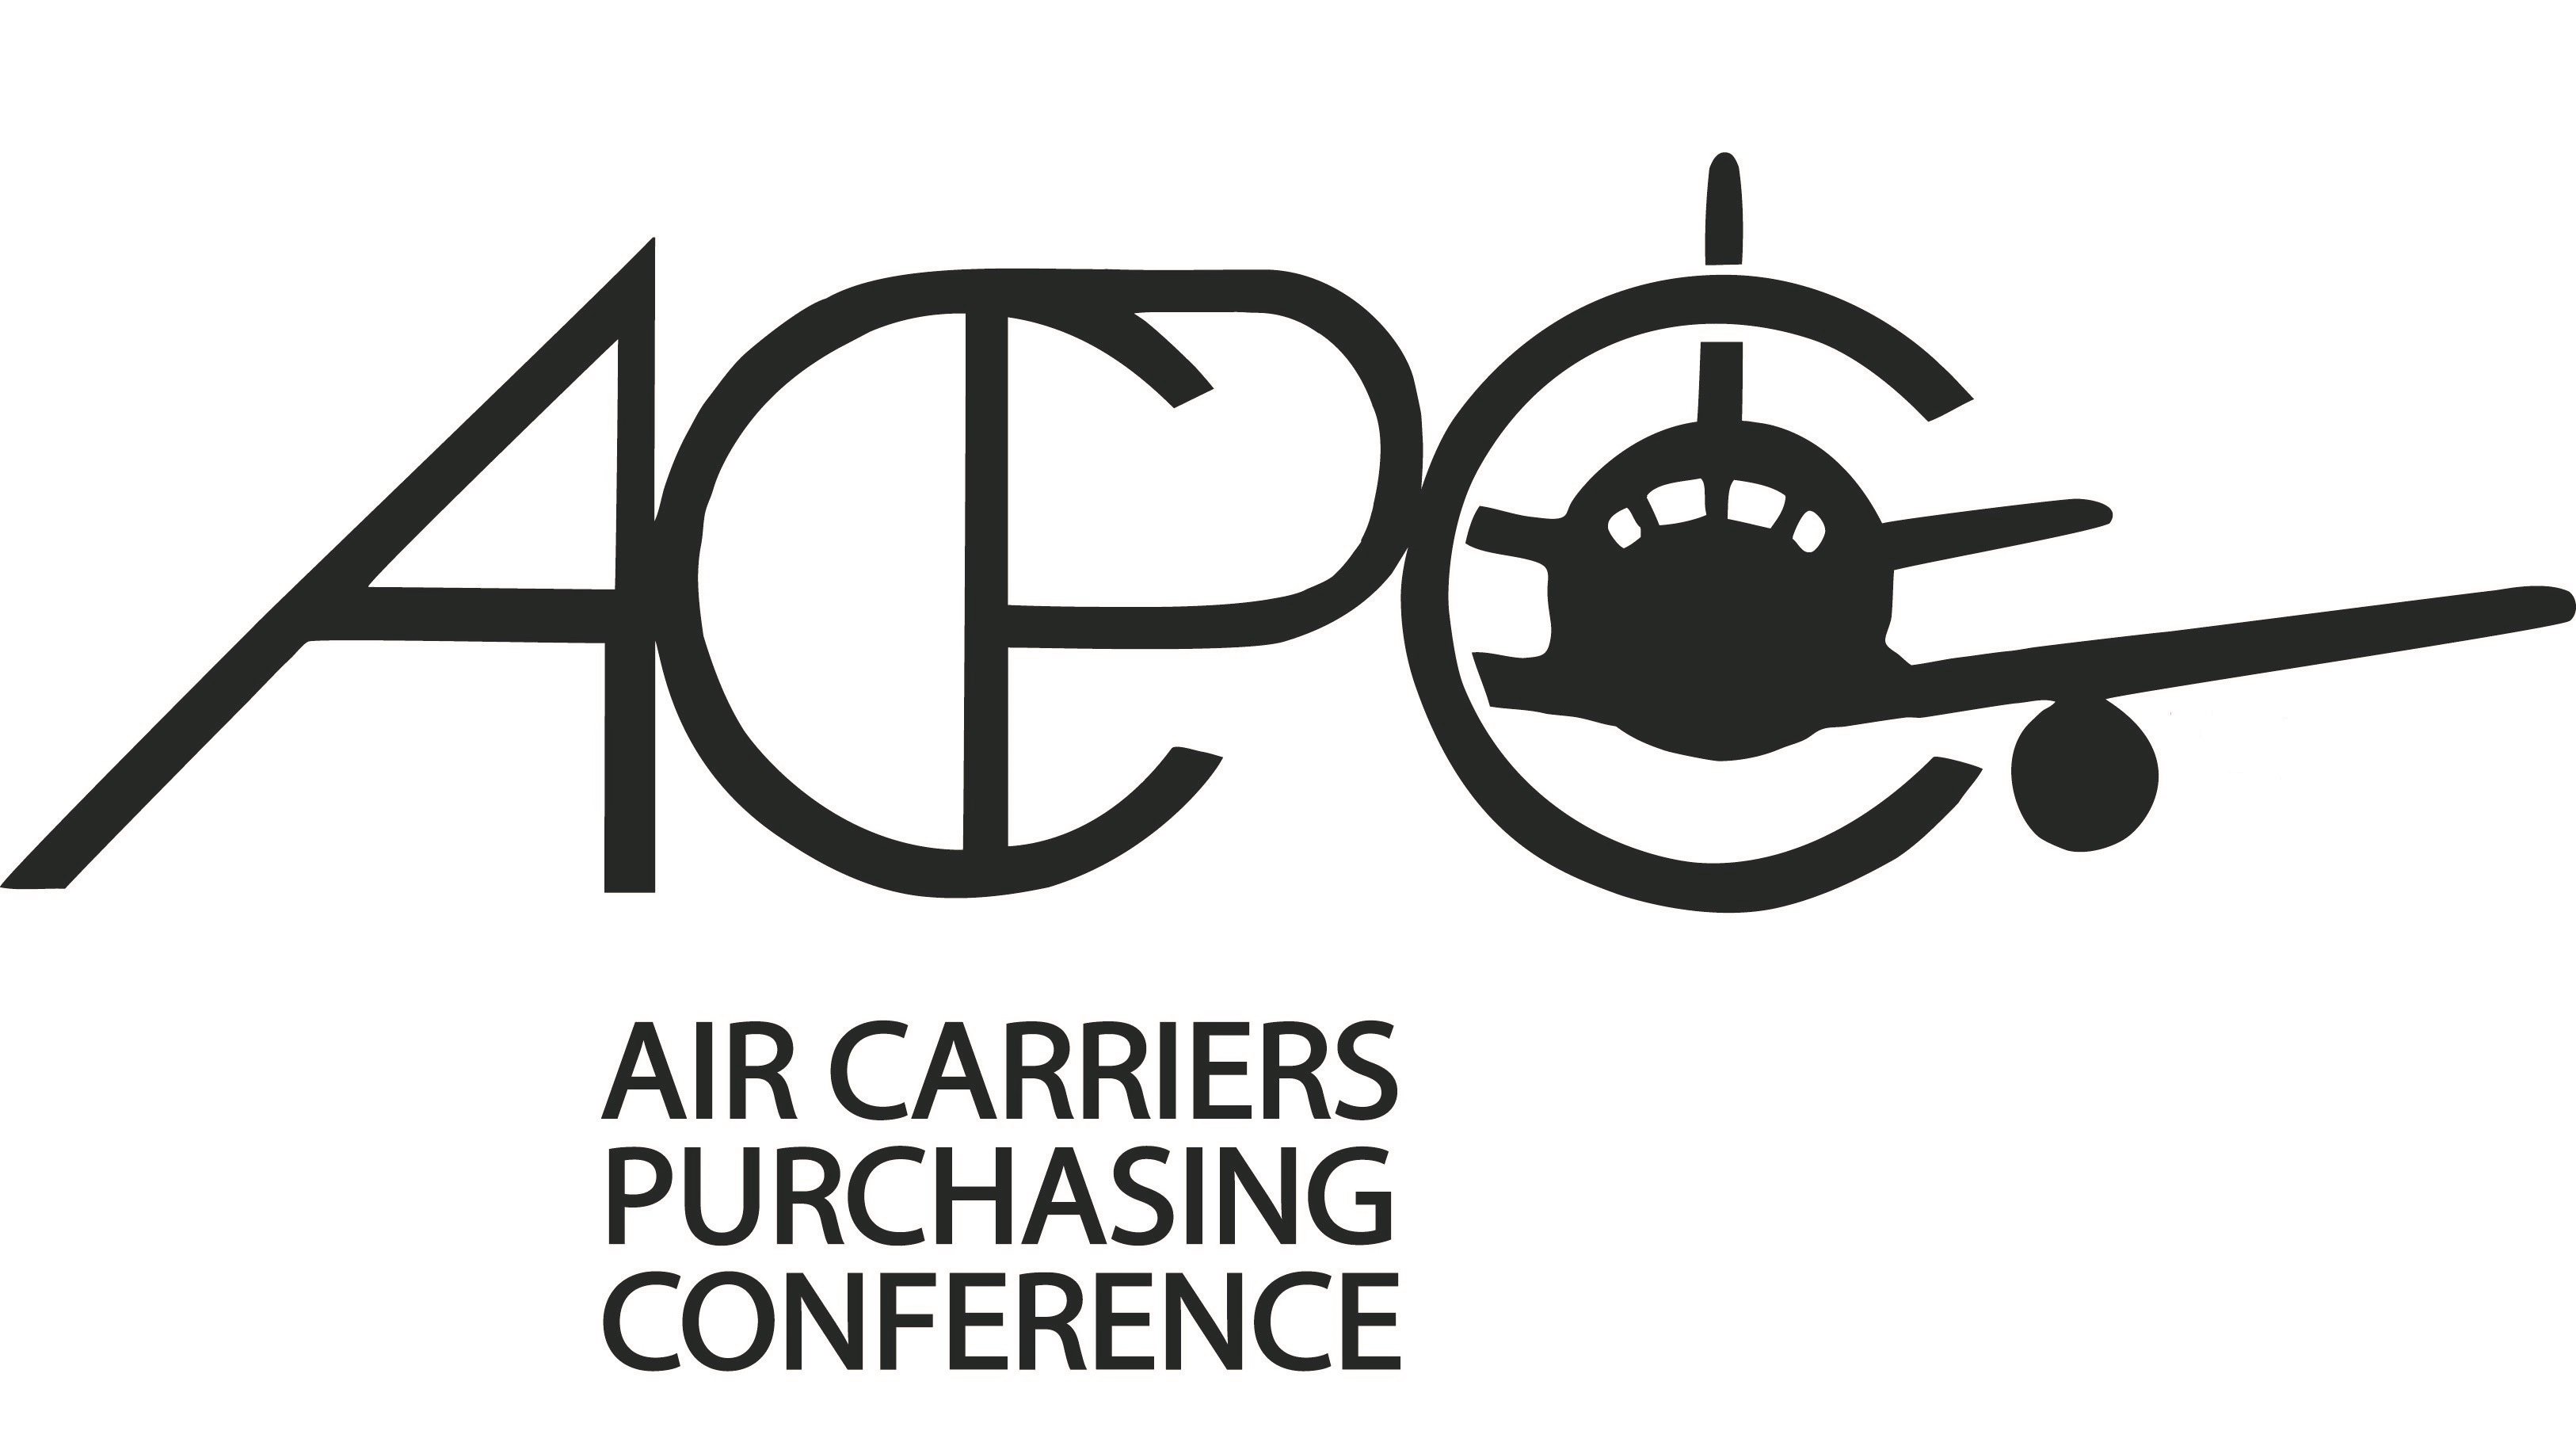 ACPC AIR CARRIERS PURCHASING CONFERENCE The Air Carriers Purchasing